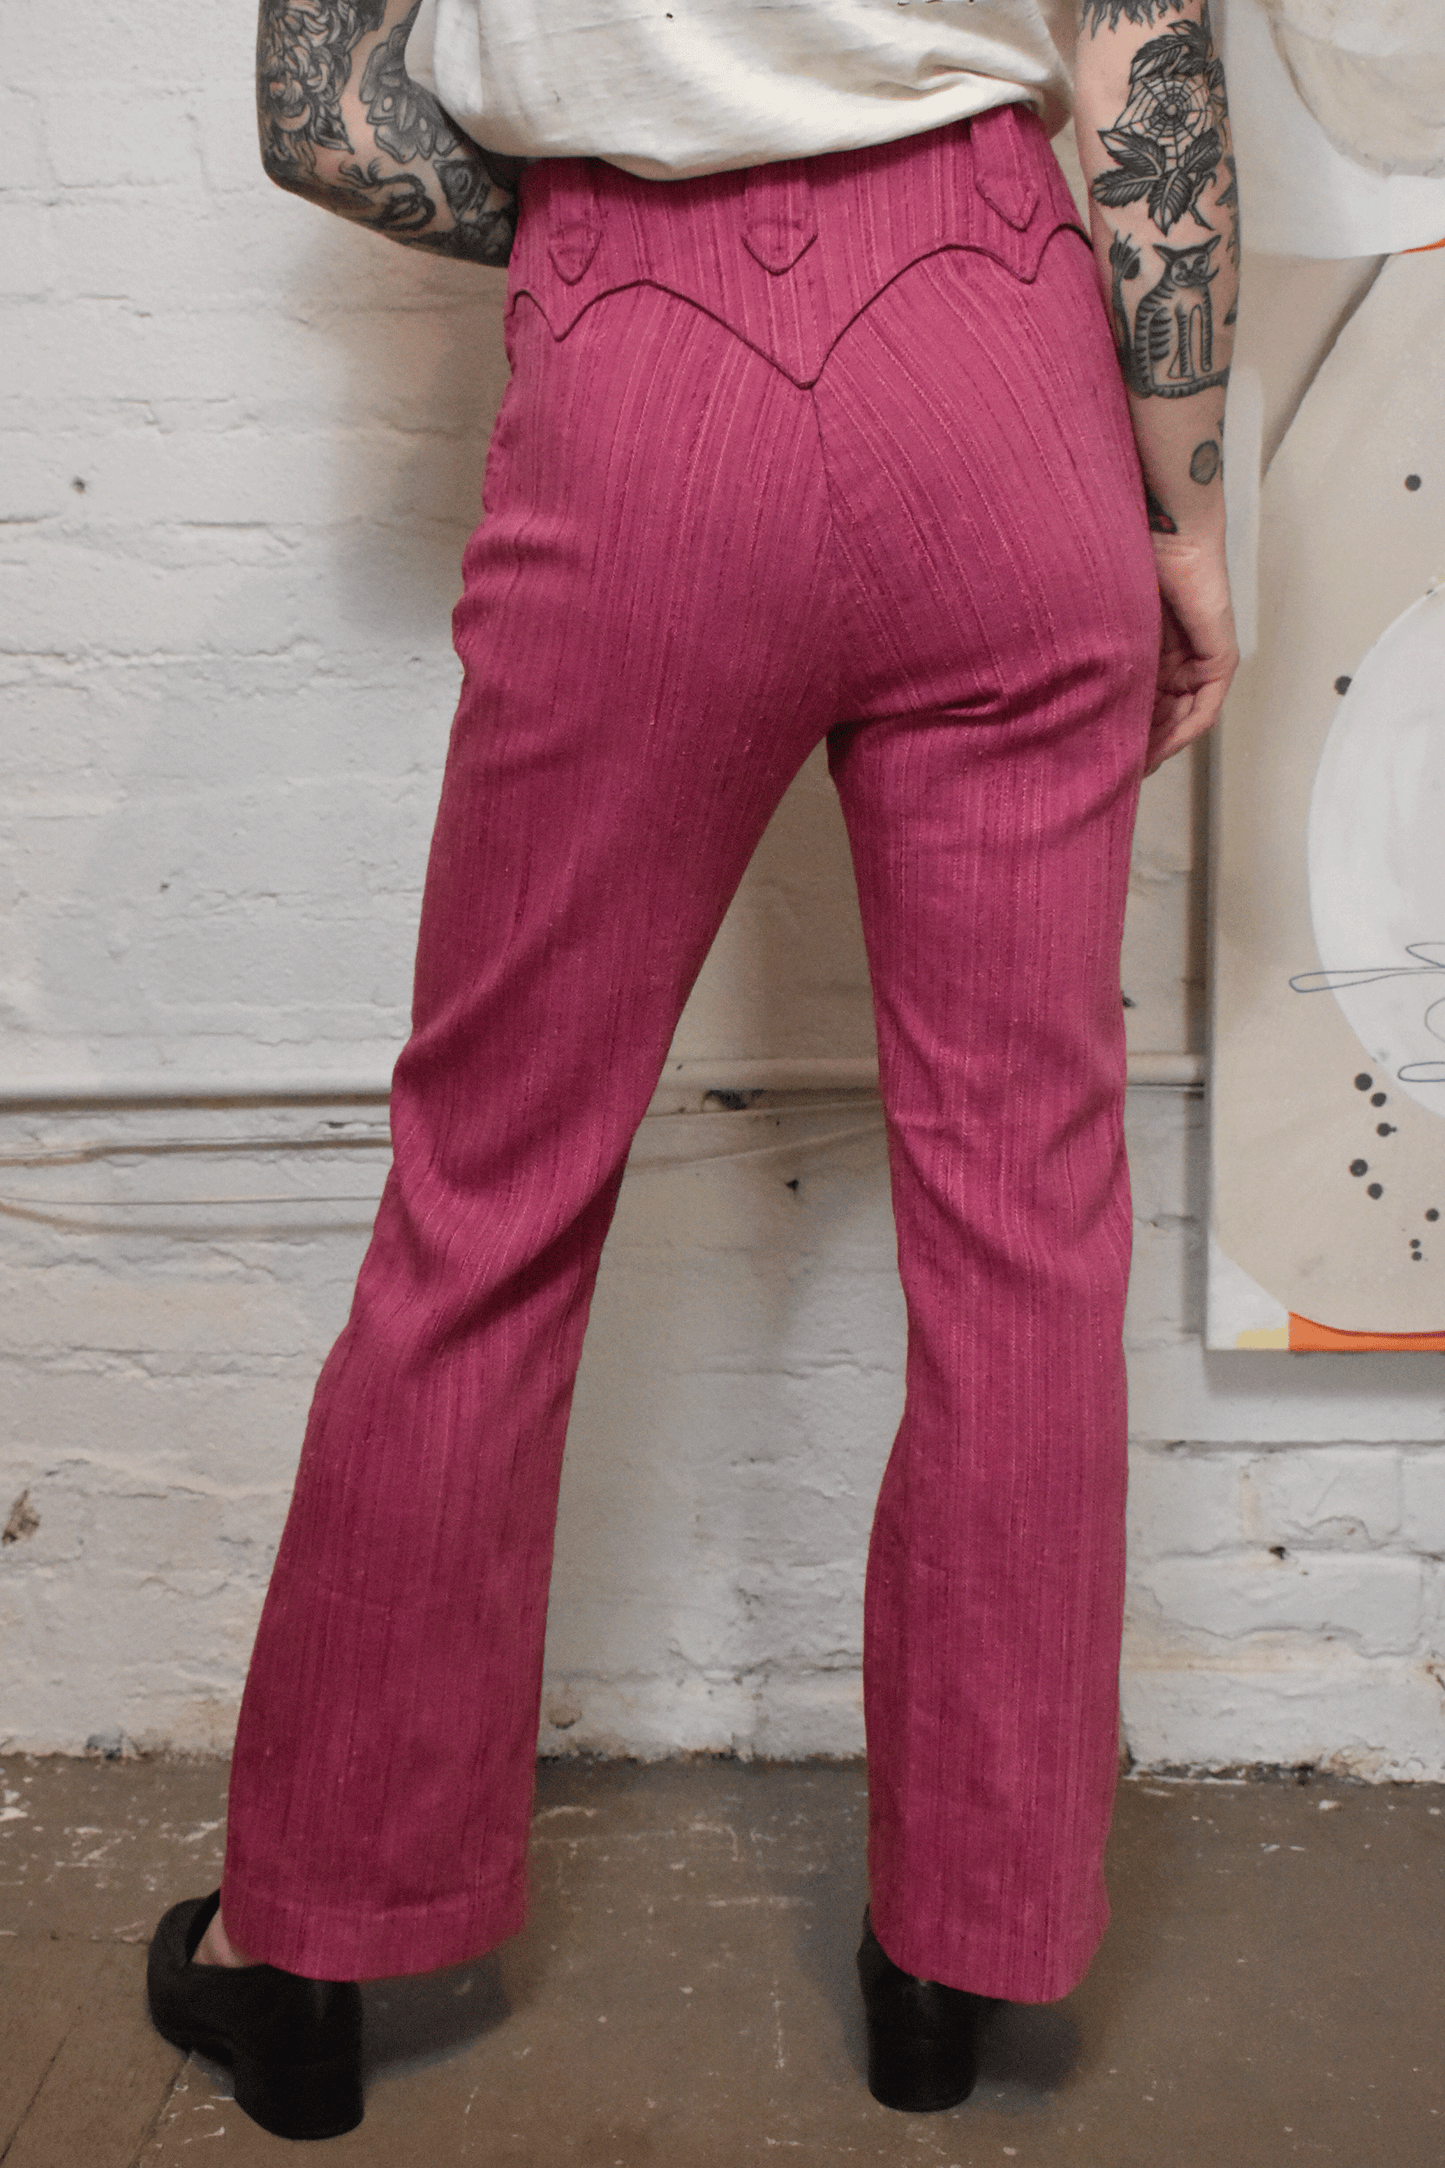 Vintage 1970s "Lasso" Textured Hot Pink Western Trousers